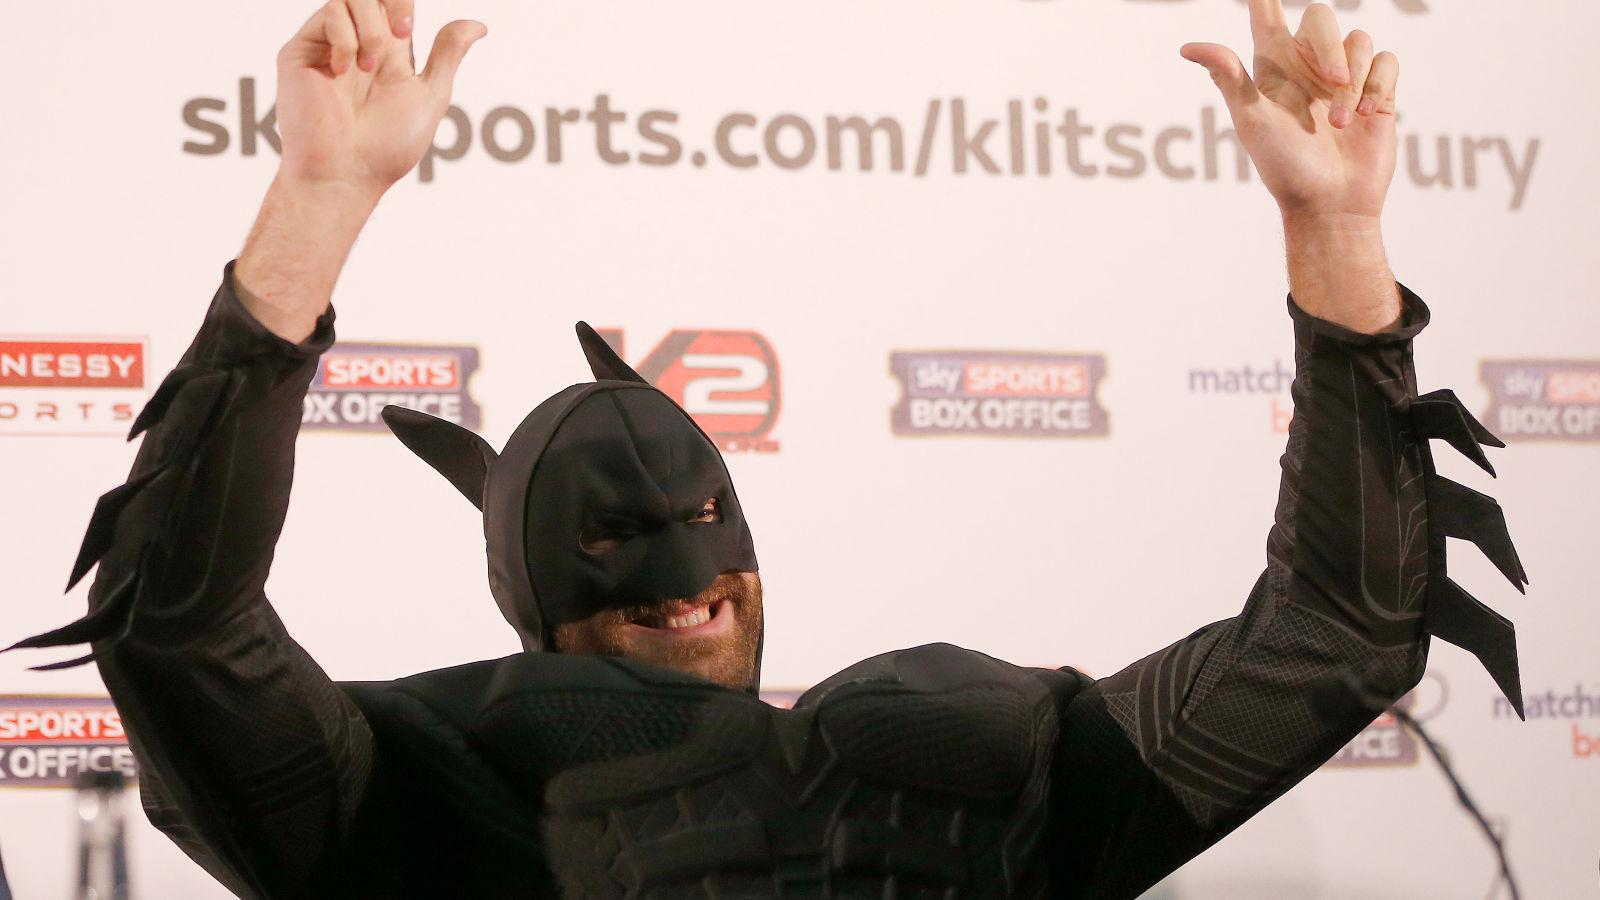 Tyson Fury dressed up as Batman prior to his world title fight with Wladimir Klitschko back in 2015